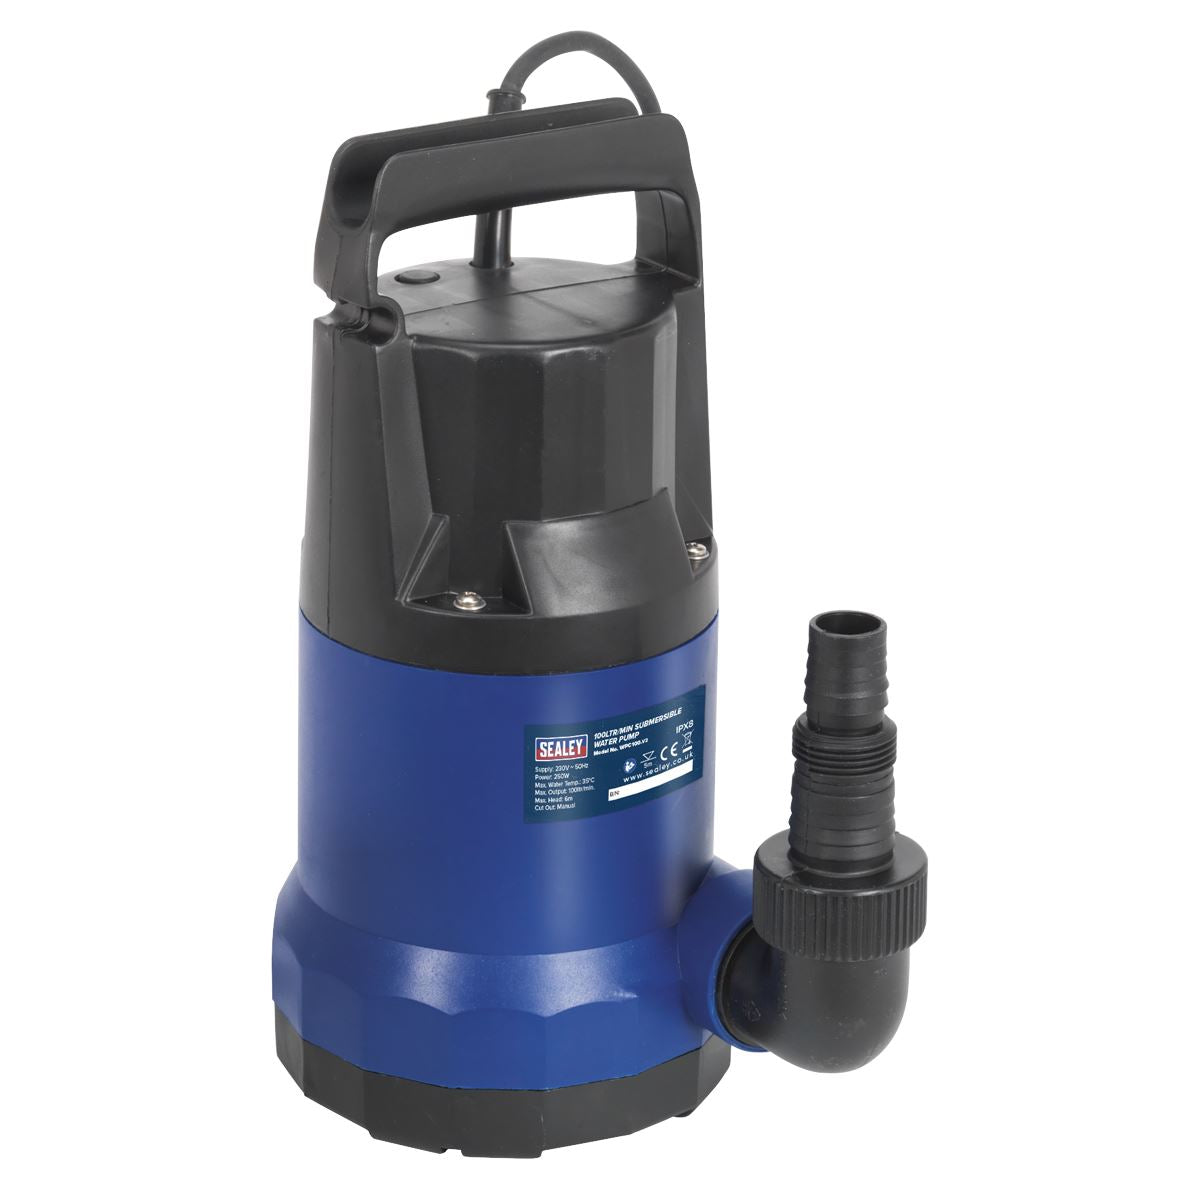 Sealey Submersible Clean Water Pump 100L/min 230V